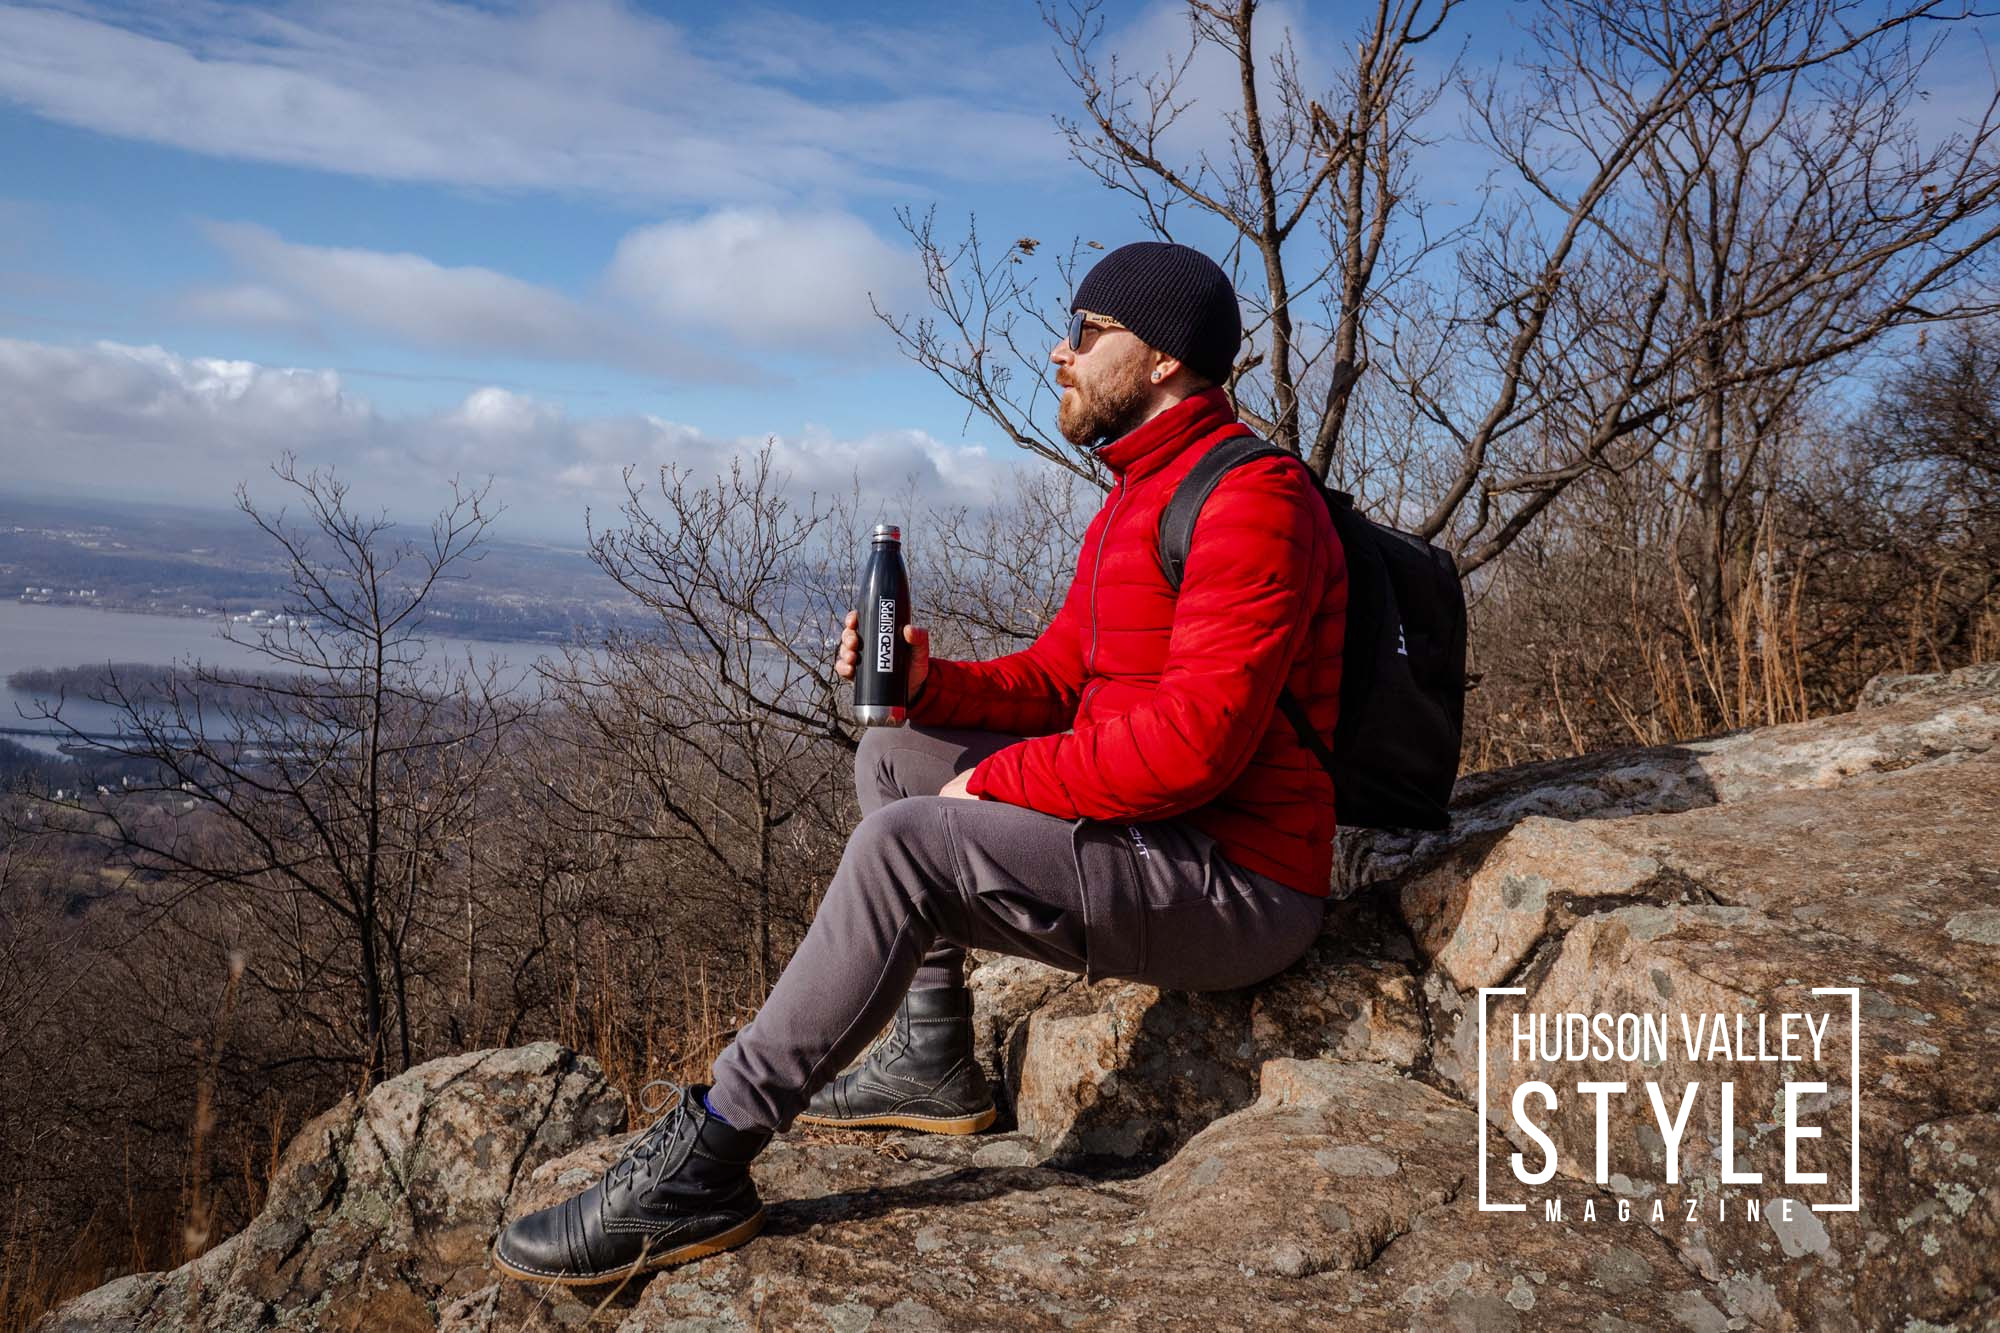 A Seasonal Guide to Hudson Valley's Outdoor Adventures – Wellness Travel with Coach Maxwell Alexander – Presented by HARD NEW YORK